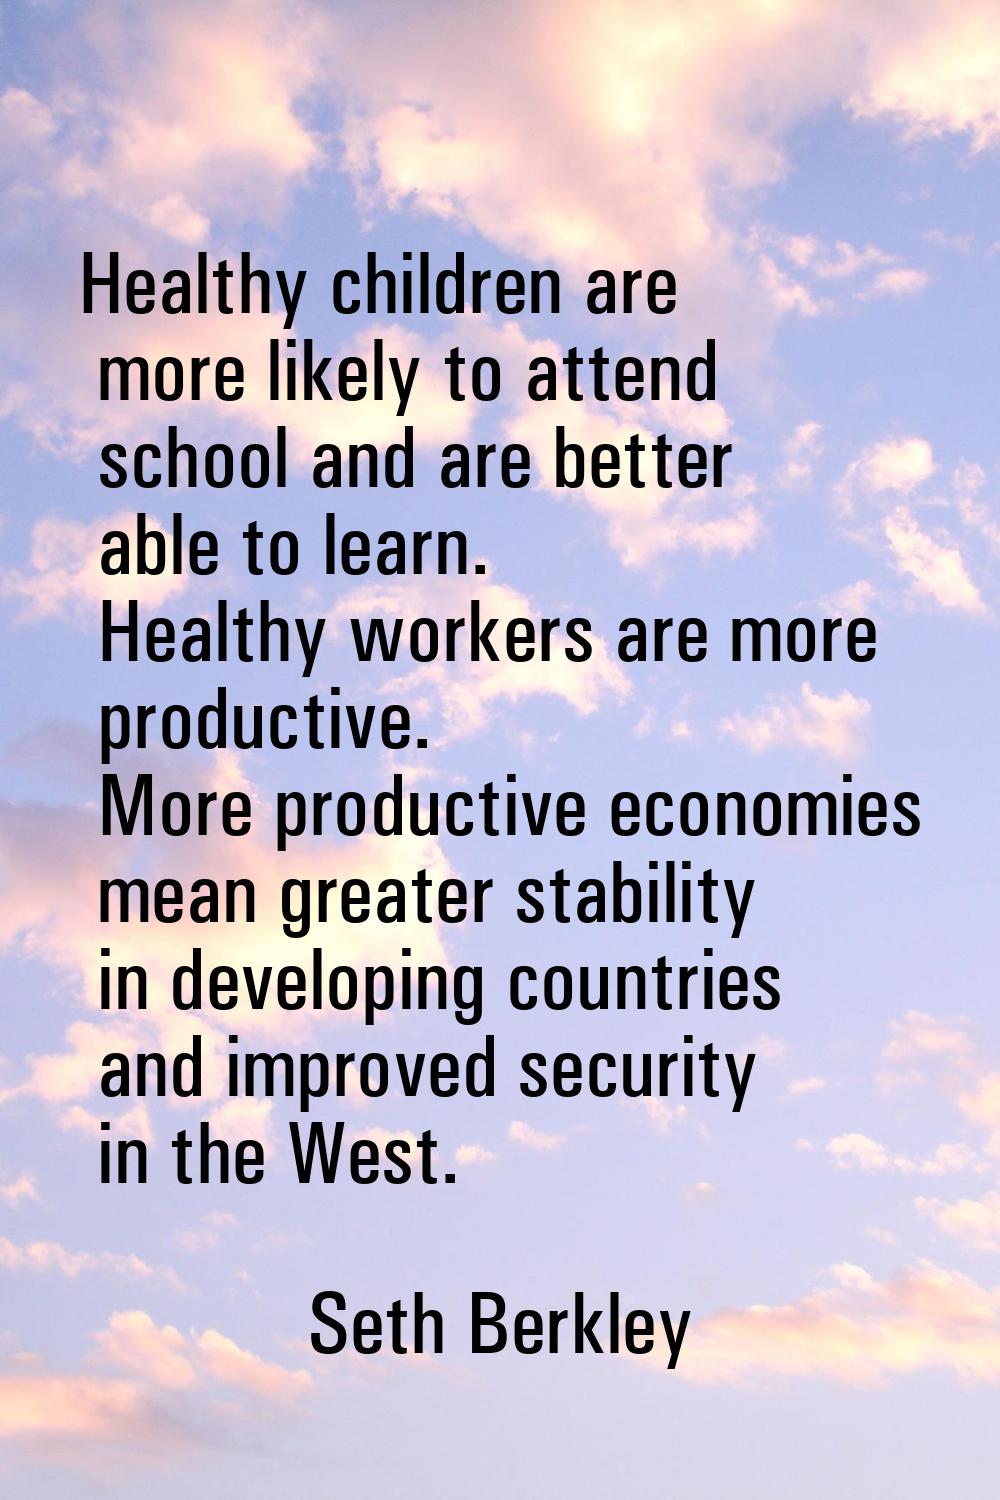 Healthy children are more likely to attend school and are better able to learn. Healthy workers are